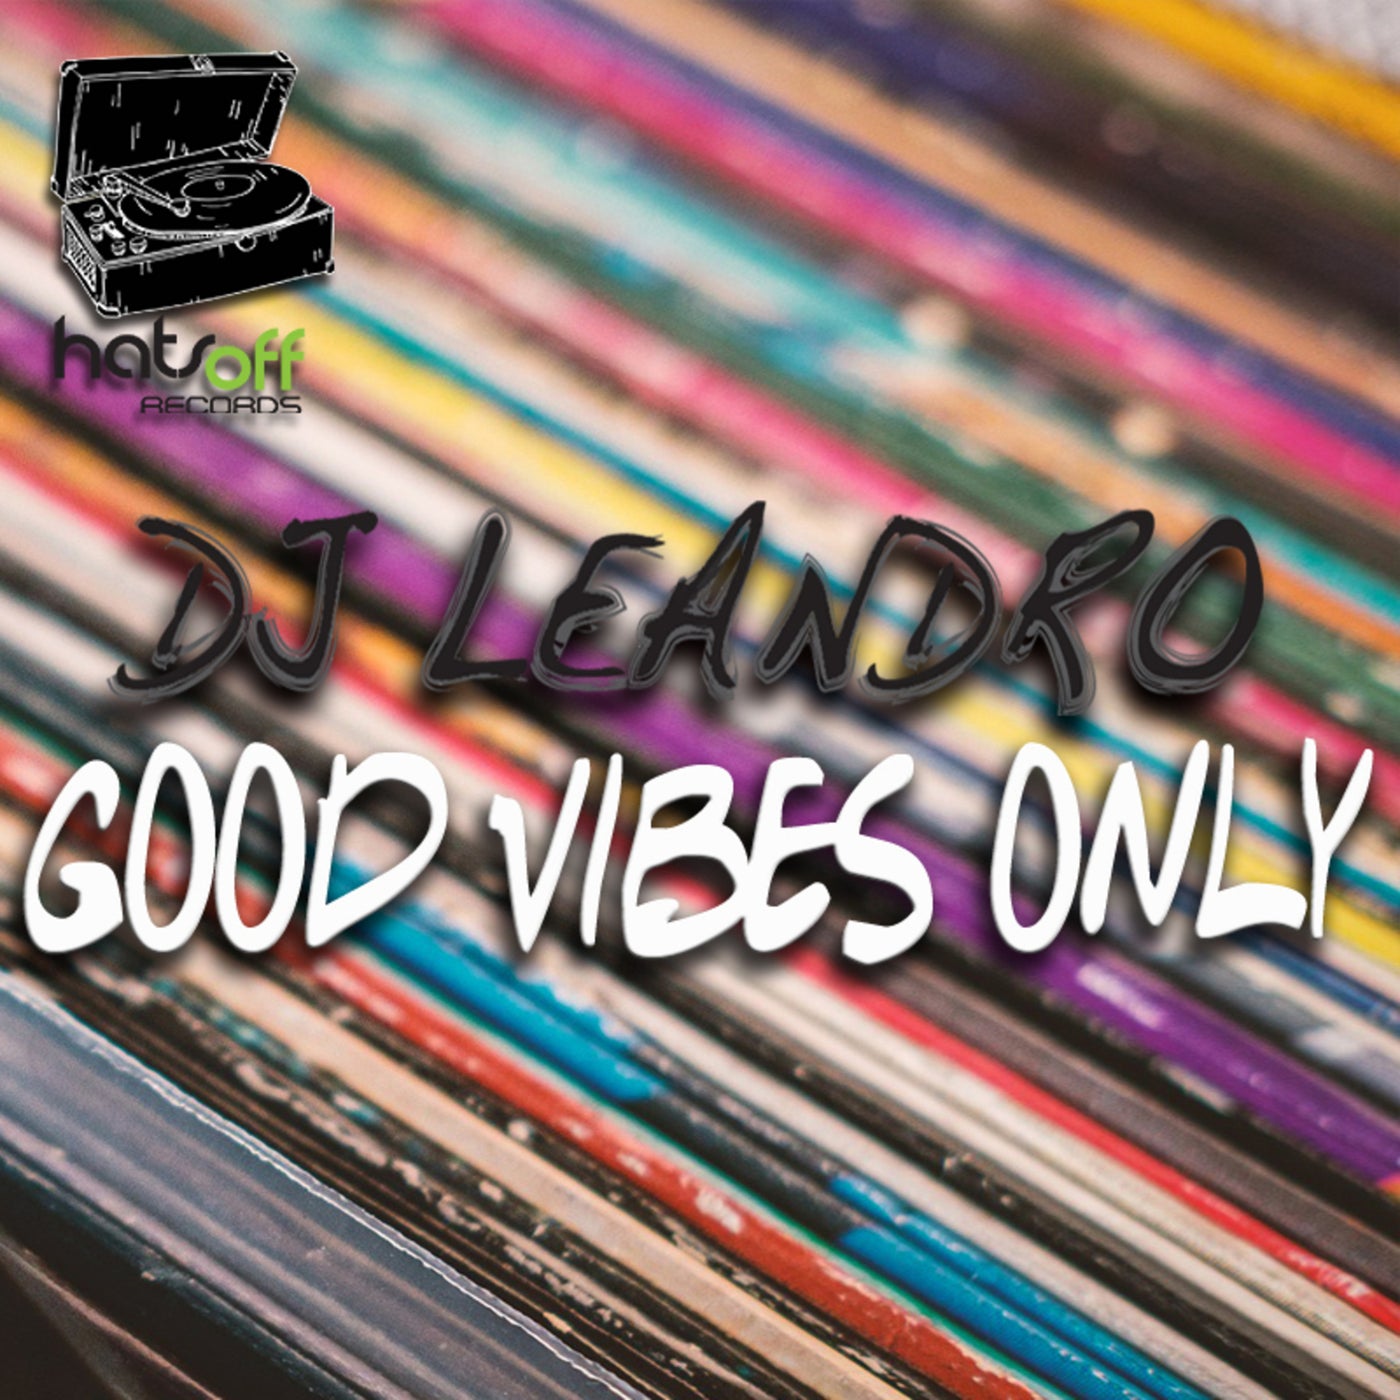 Dj Leandro - Good vibes only [HOR035]